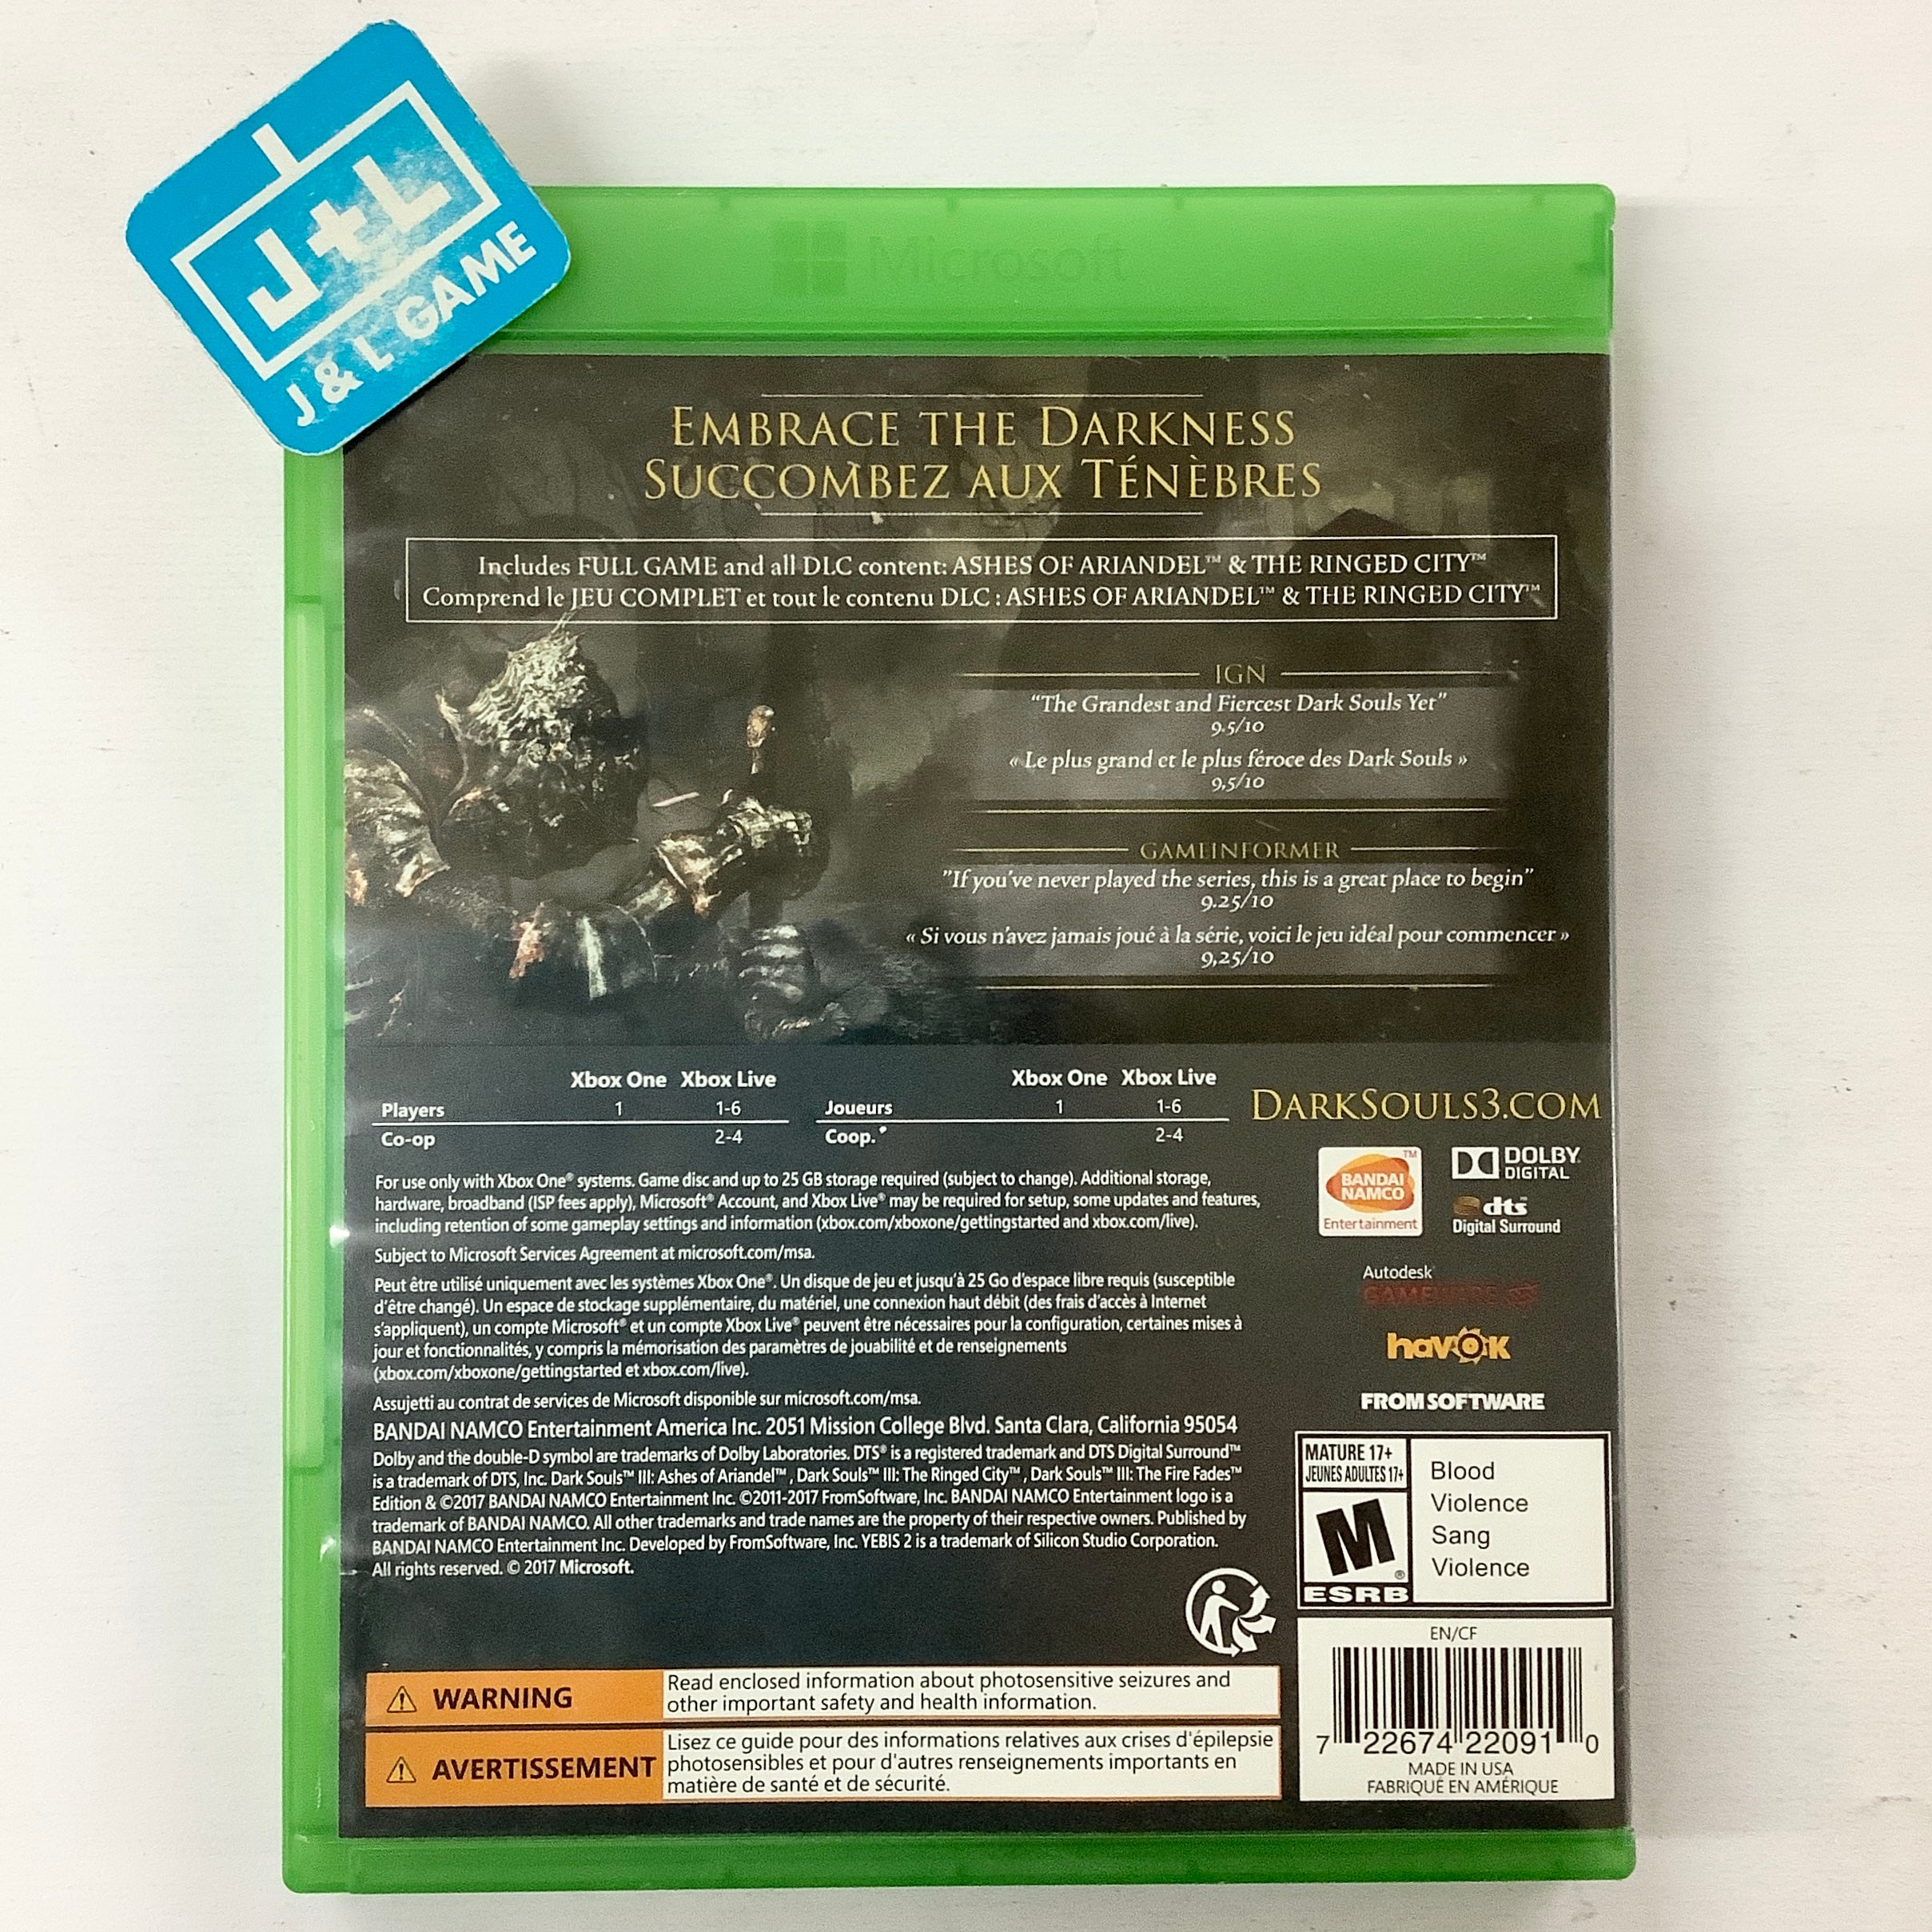 Dark Souls III: The Fire Fades Edition - (XB1) Xbox One [Pre-Owned] Video Games Bandai Namco Games   